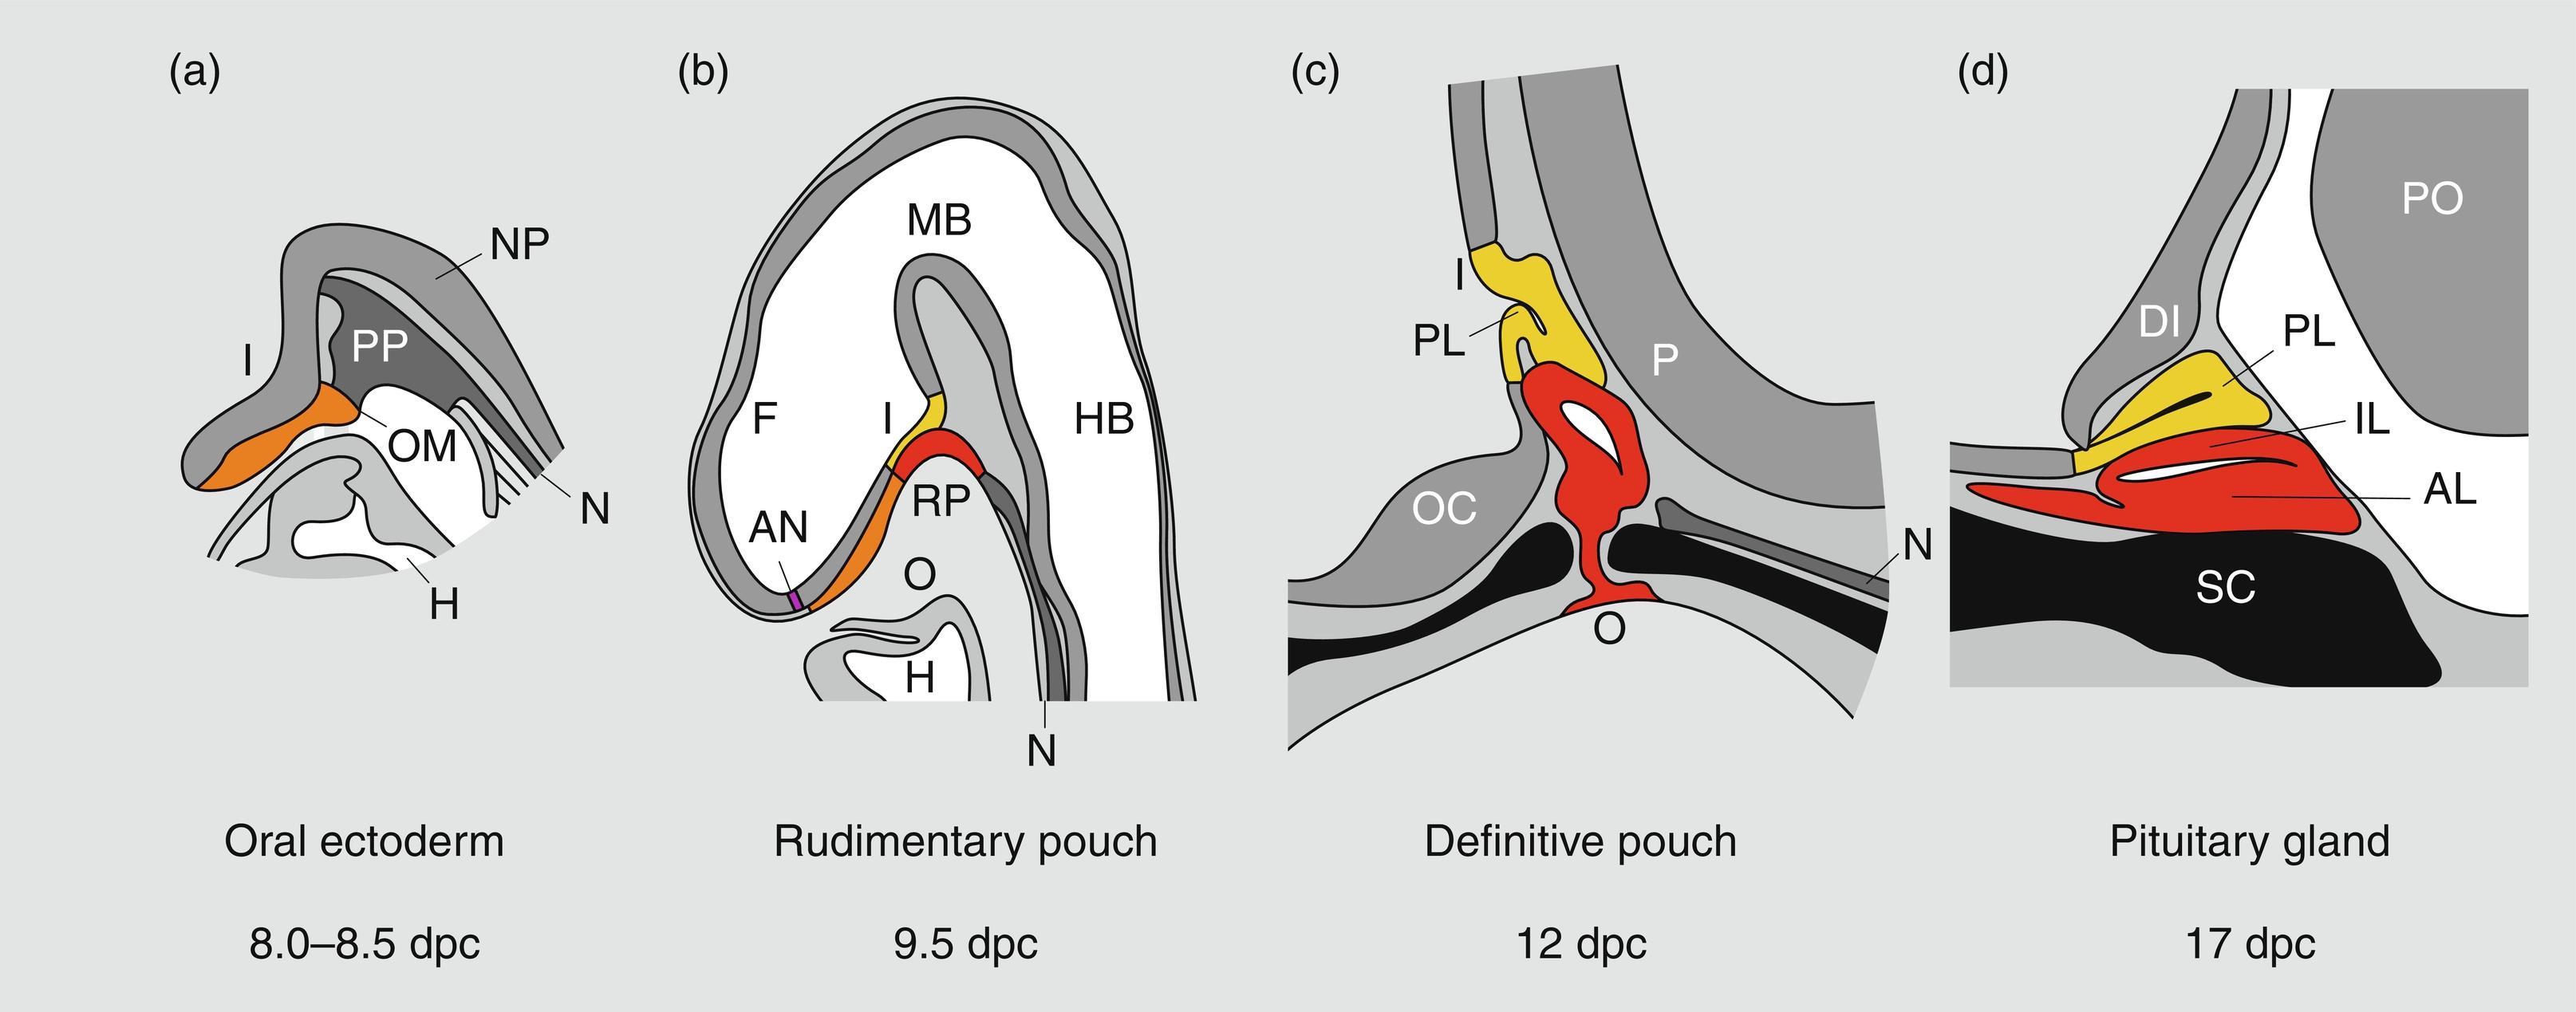 Fig. 11.2, Mouse pituitary development in sagittal section. Stages of development are indicated in dpc. AL , Anterior lobe; AN , anterior neural pore; DI , diencephalon; F , forebrain; H, heart; HB , hindbrain; I , infundibulum; IL , intermediate lobe; MB , midbrain; N , notochord; NP , neural plate; O , oral cavity; OC , optic chiasma; OM , oral membrane; P , pontine flexure; PL , posterior lobe; PO , pons; PP , prechordal plate; RP , Rathke’s pouch; SC , sphenoid cartilage.